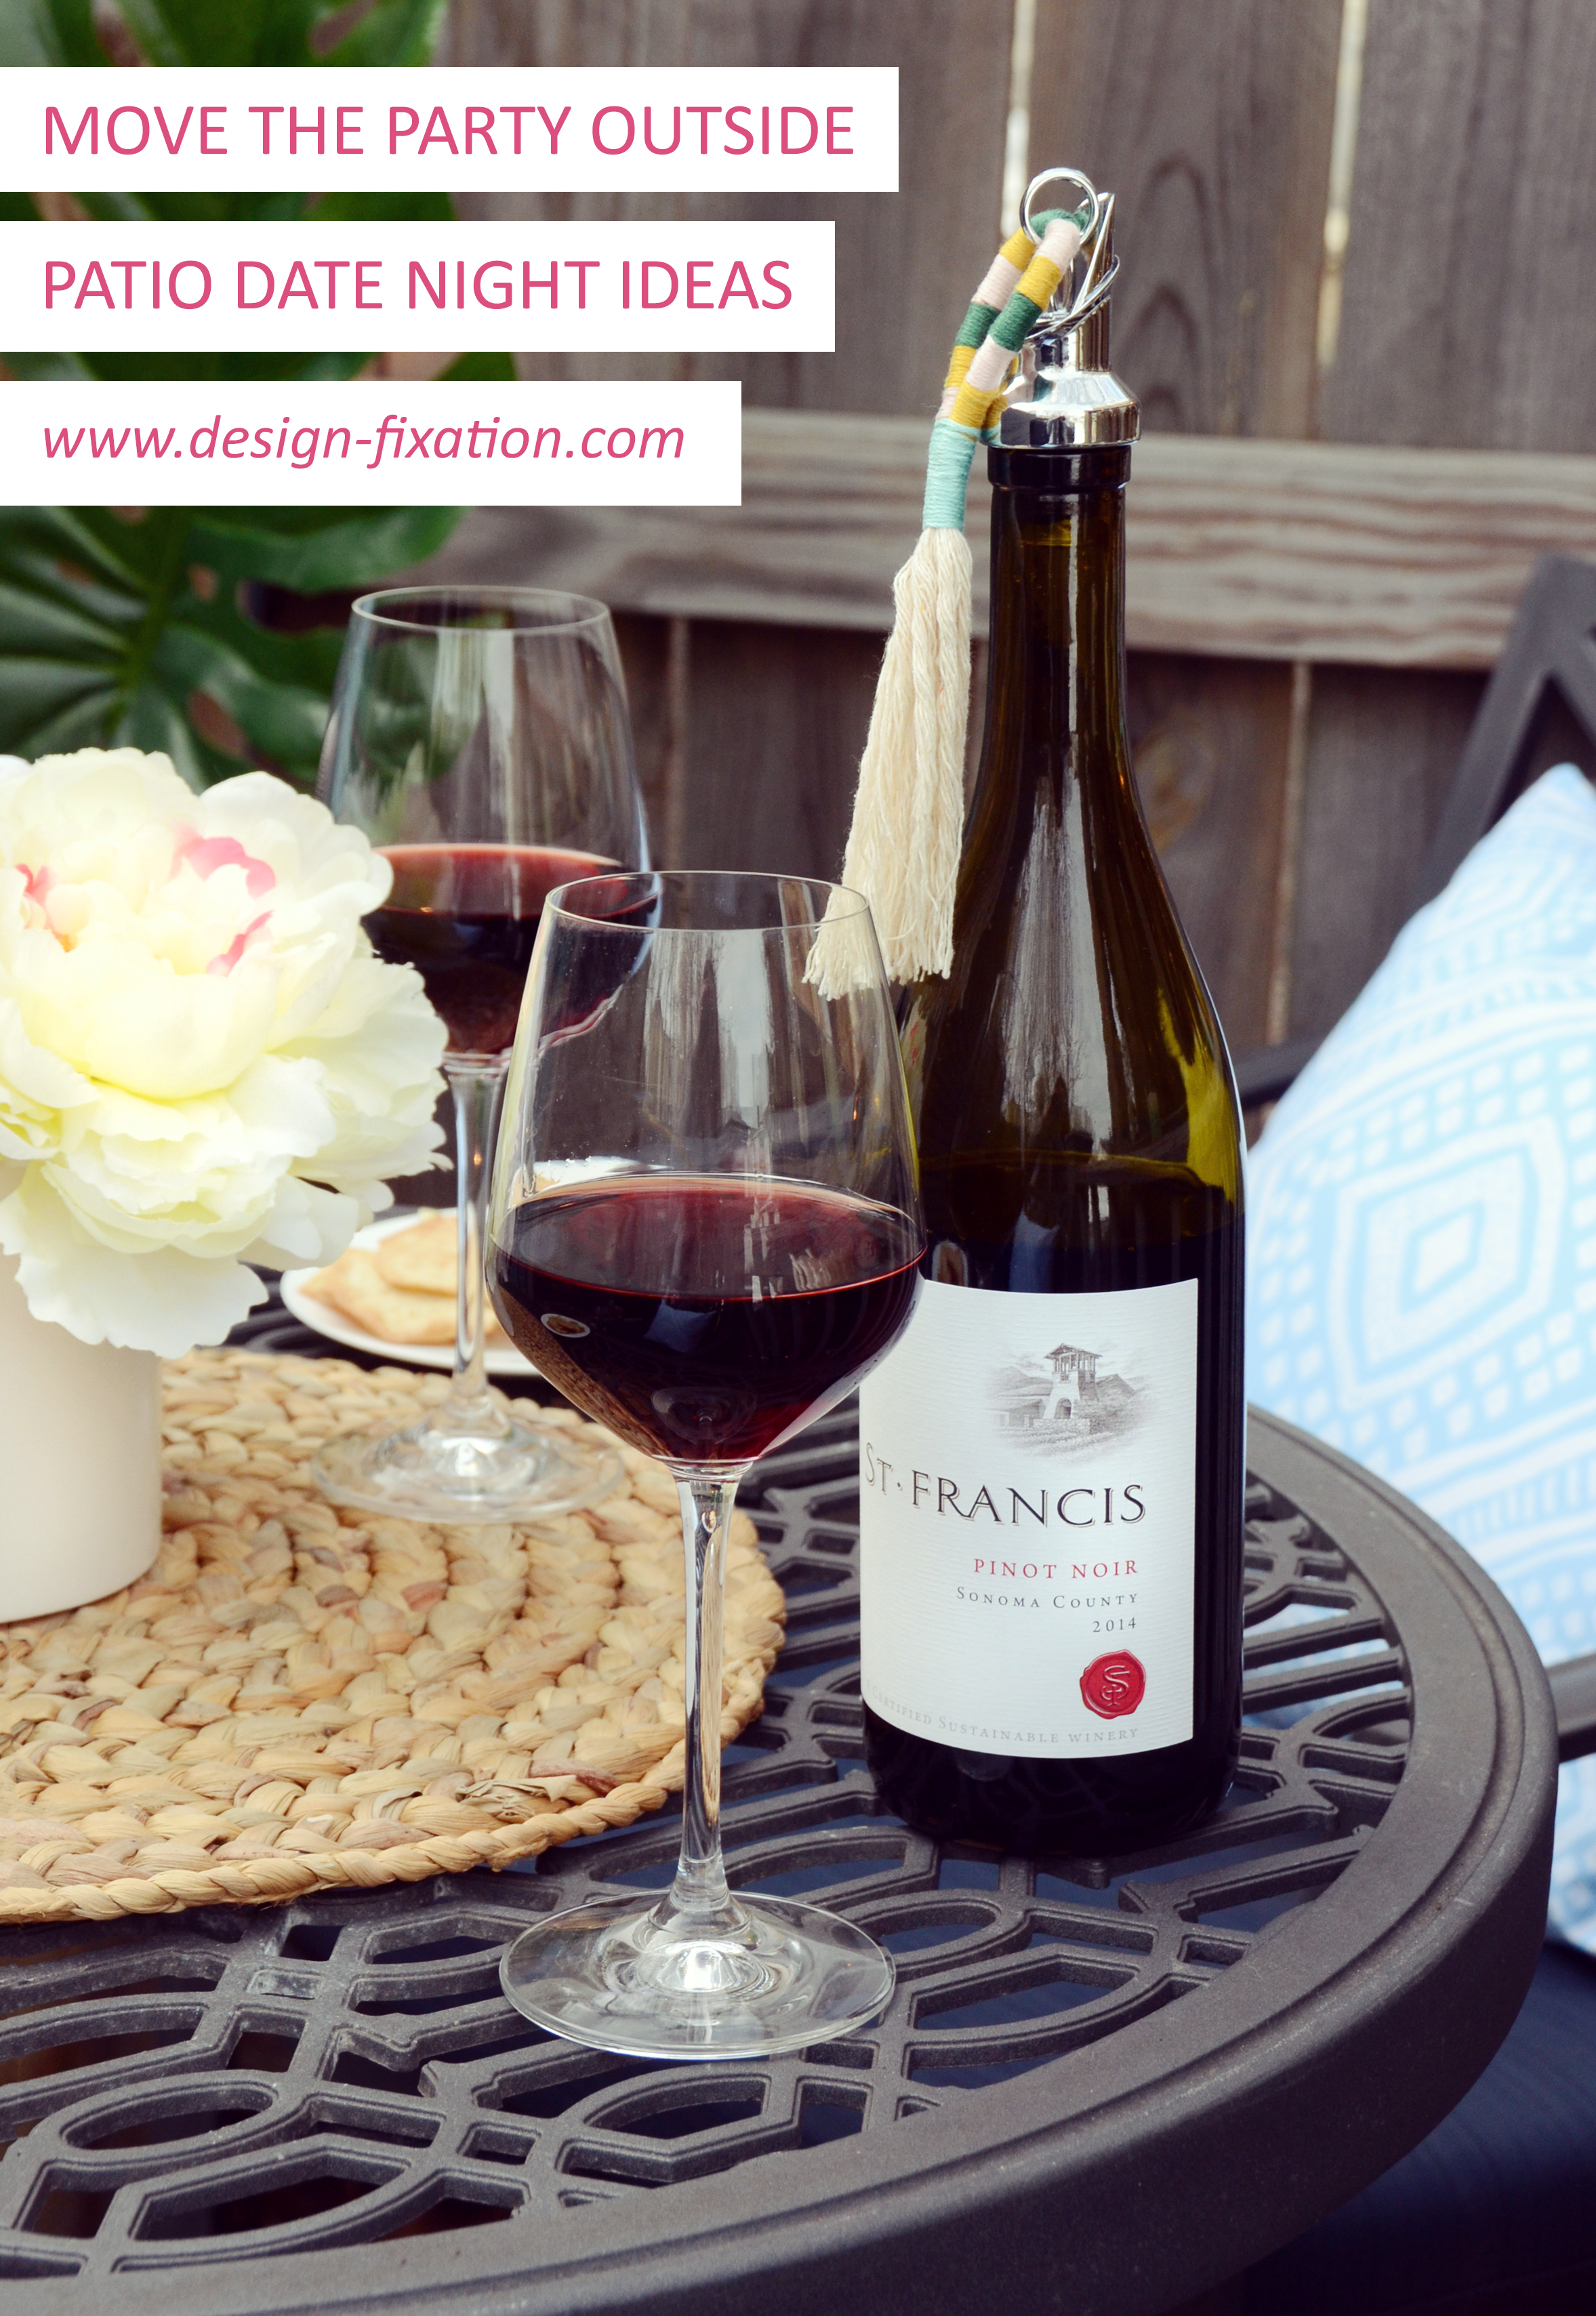 My Favorite Patio Date Night Ideas /// By Faith Towers Provencher of Design Fixation